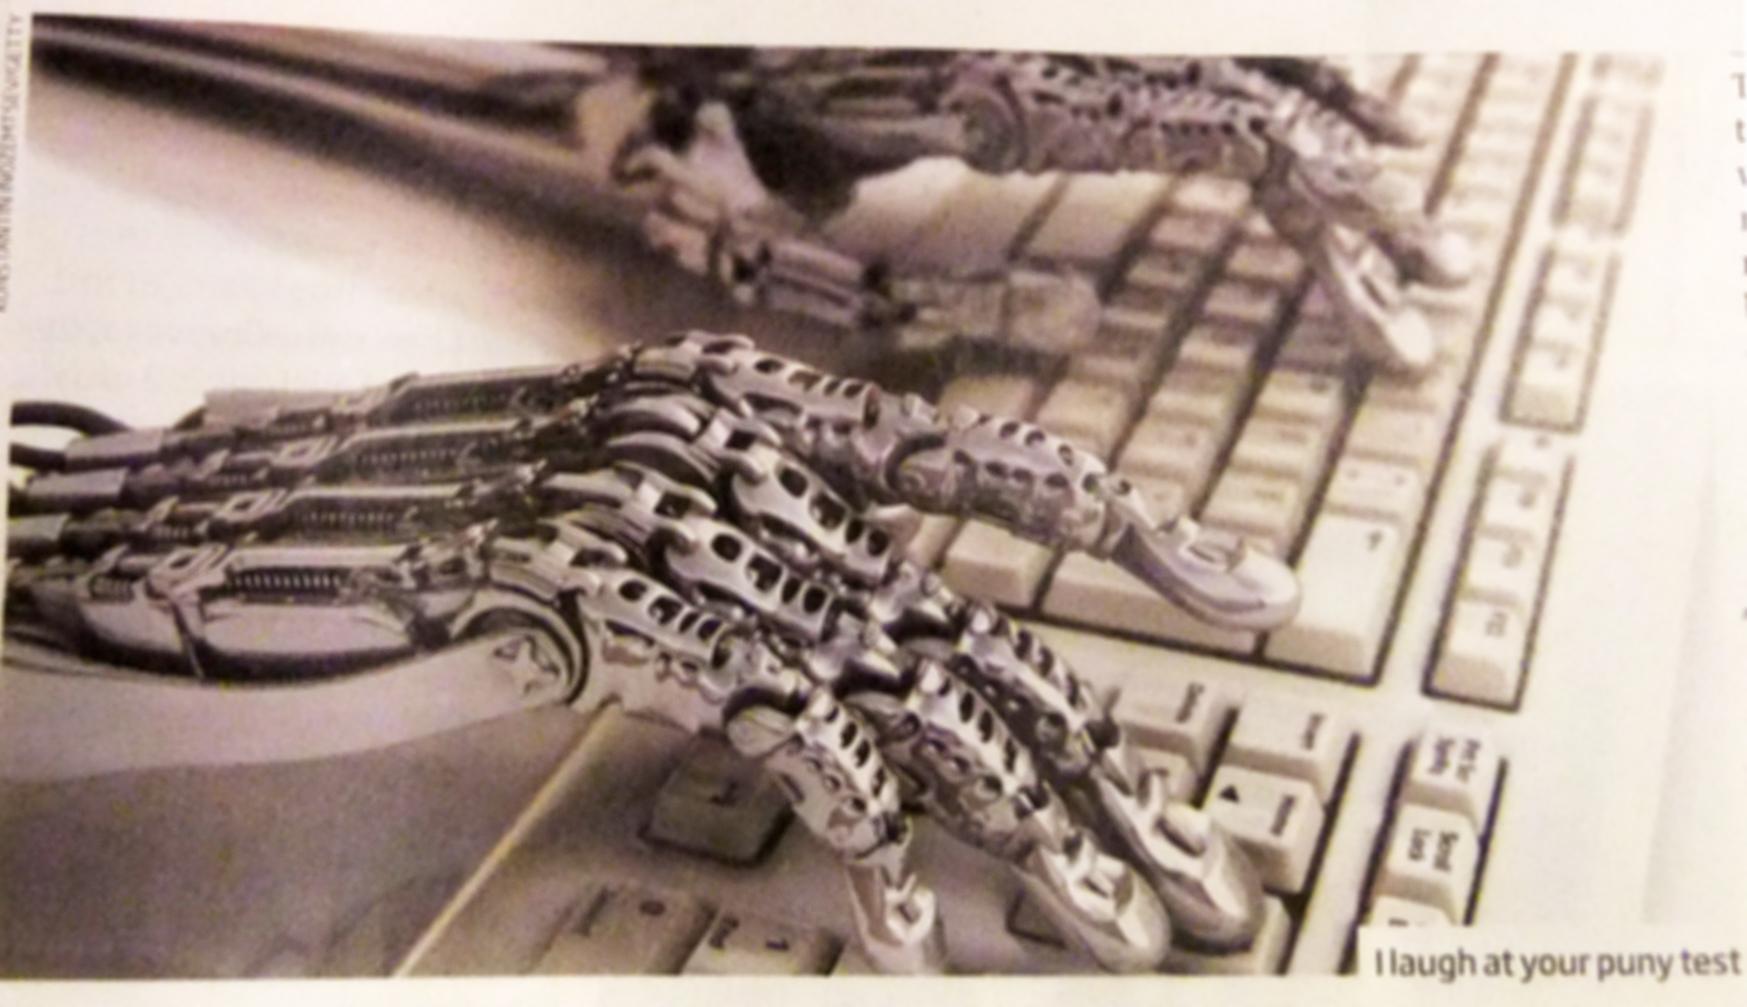 Robotic hands are typing on a computer's keyboard.